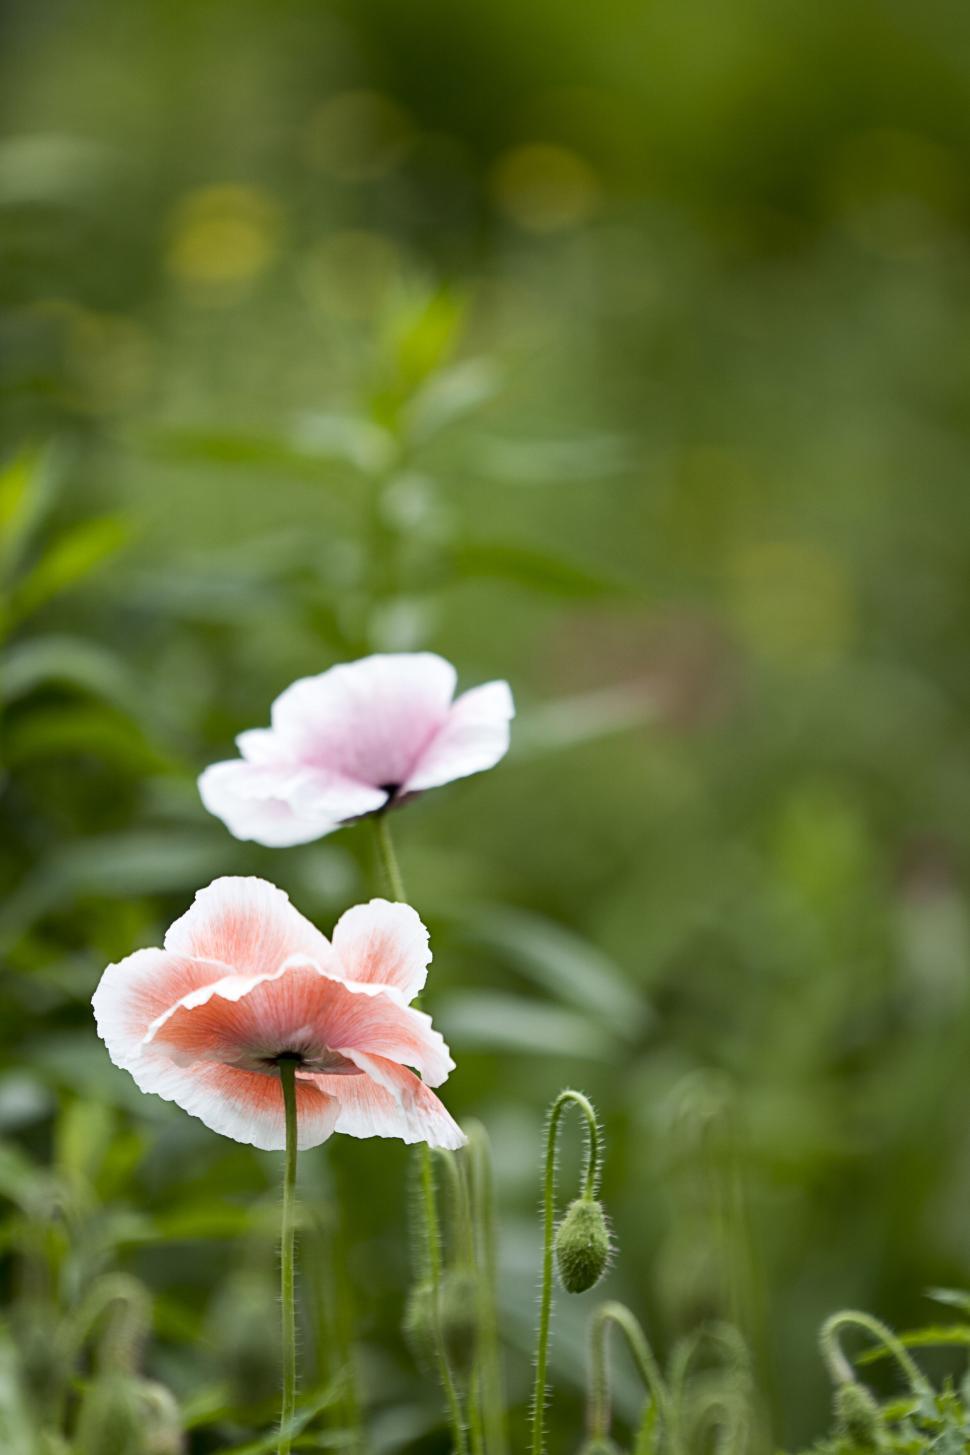 Free Image of Poppy flowers gently swaying in breeze 